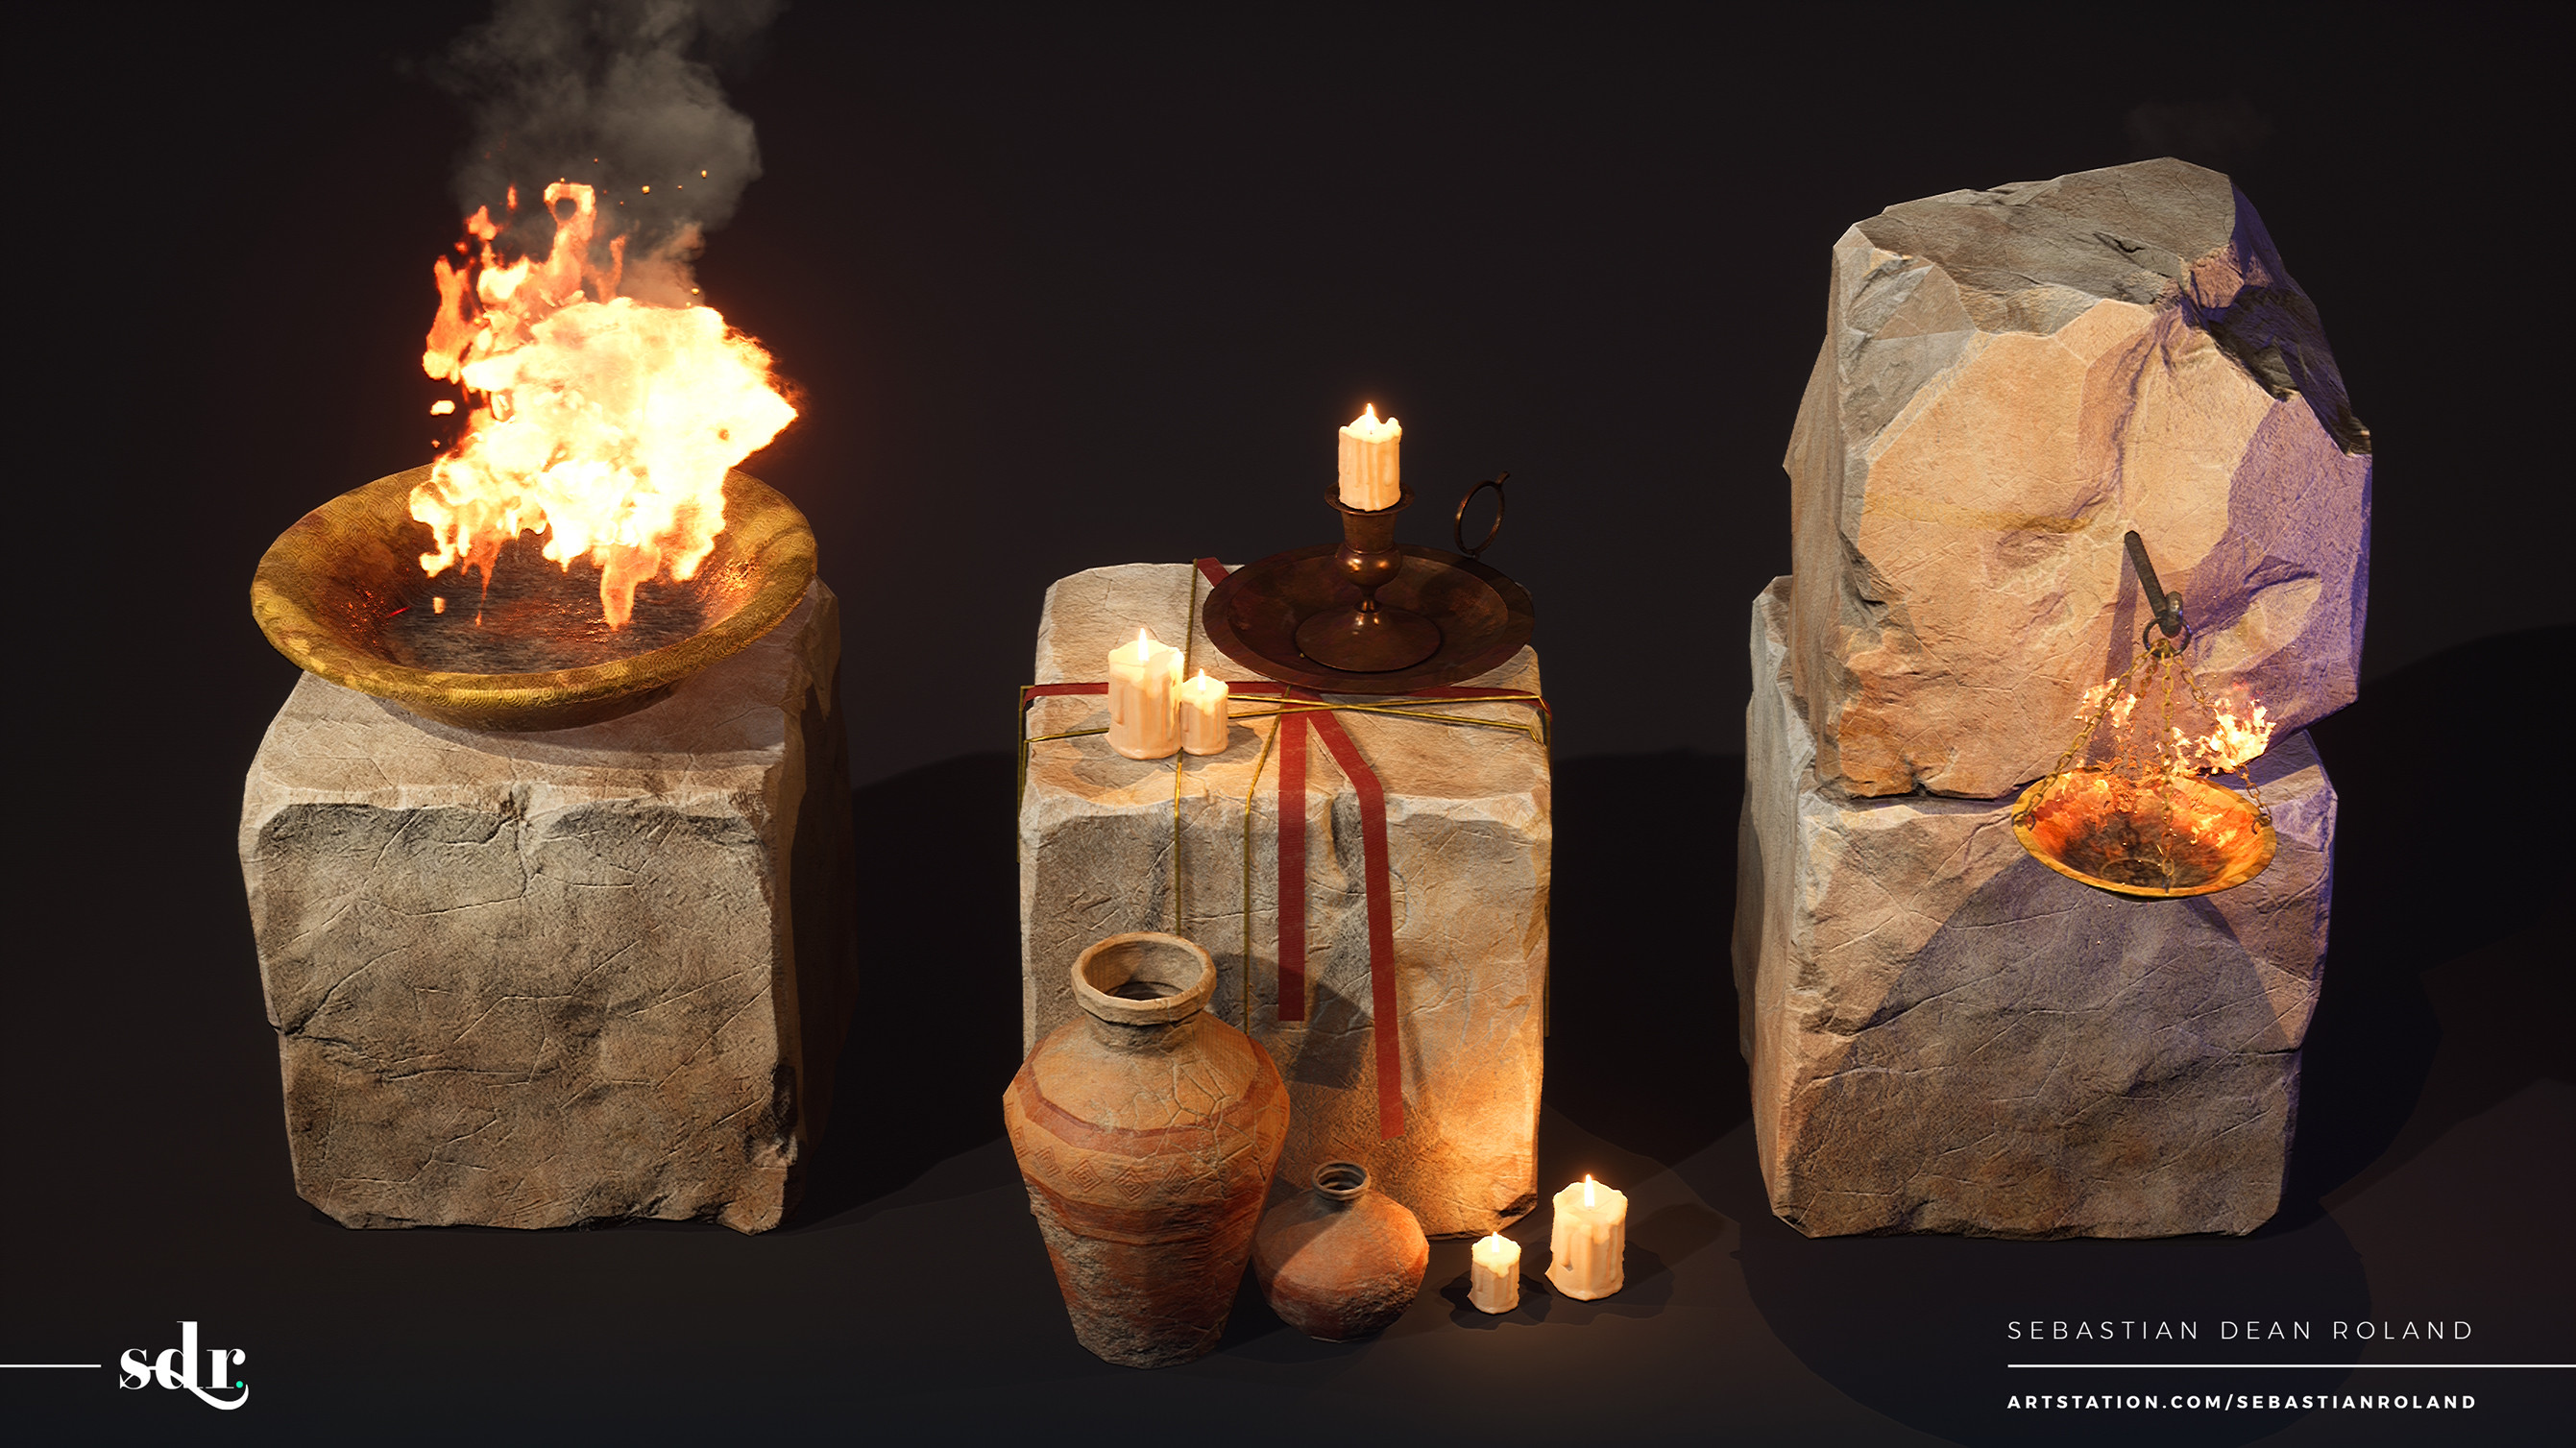 Blueprint Actors and Small Set Pieces: I created the gold threads and cloth as spline meshes in UE4 to allow more modularity for draping them around the environment. The lantern, fire basin and candle are blueprint actors with exposed parameters to allow 